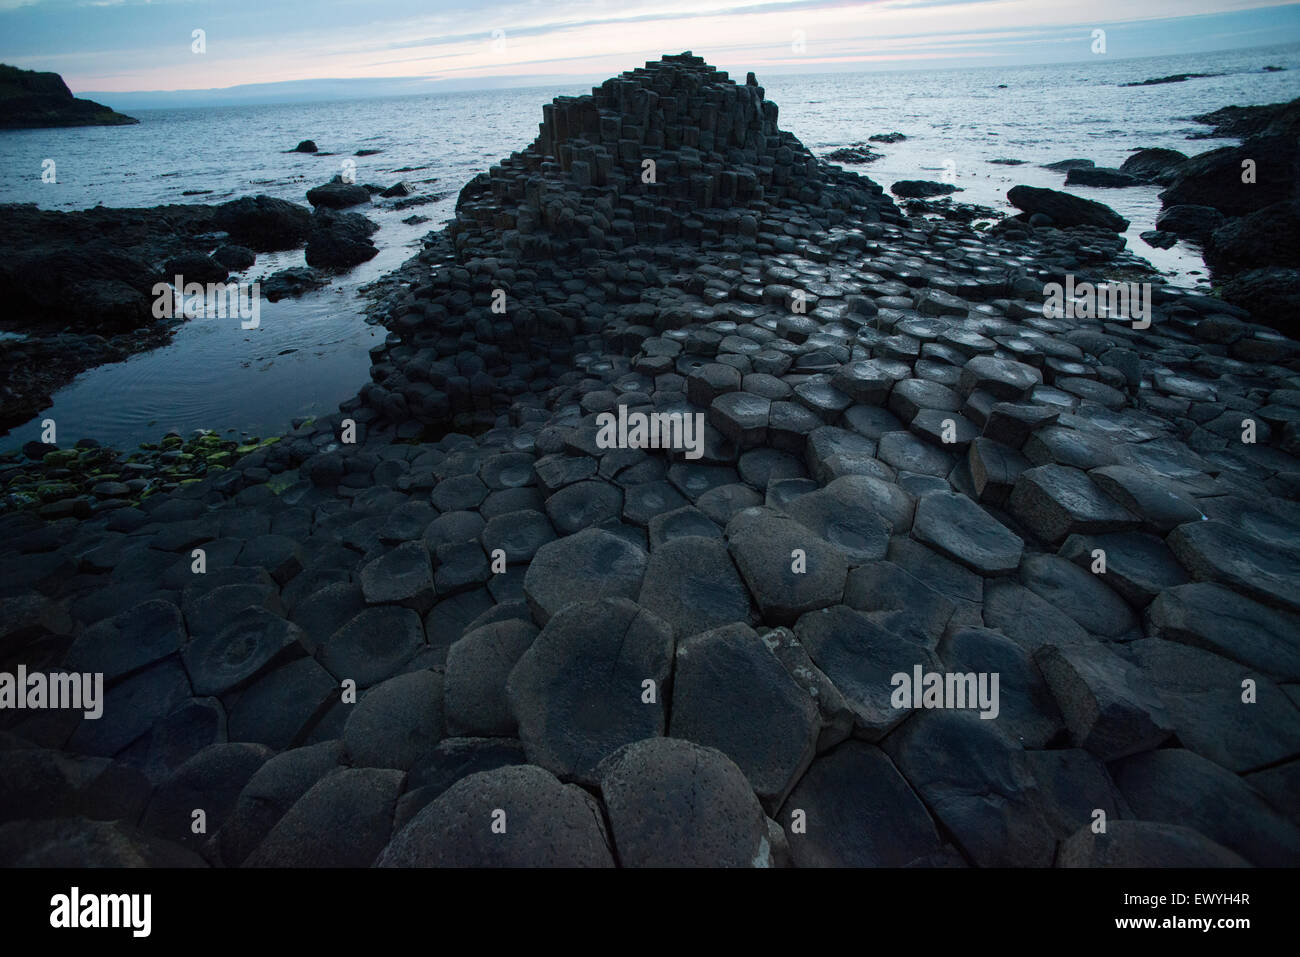 Rocking chair at the Giant's Causeway stepping stones in Northern Ireland. Stock Photo